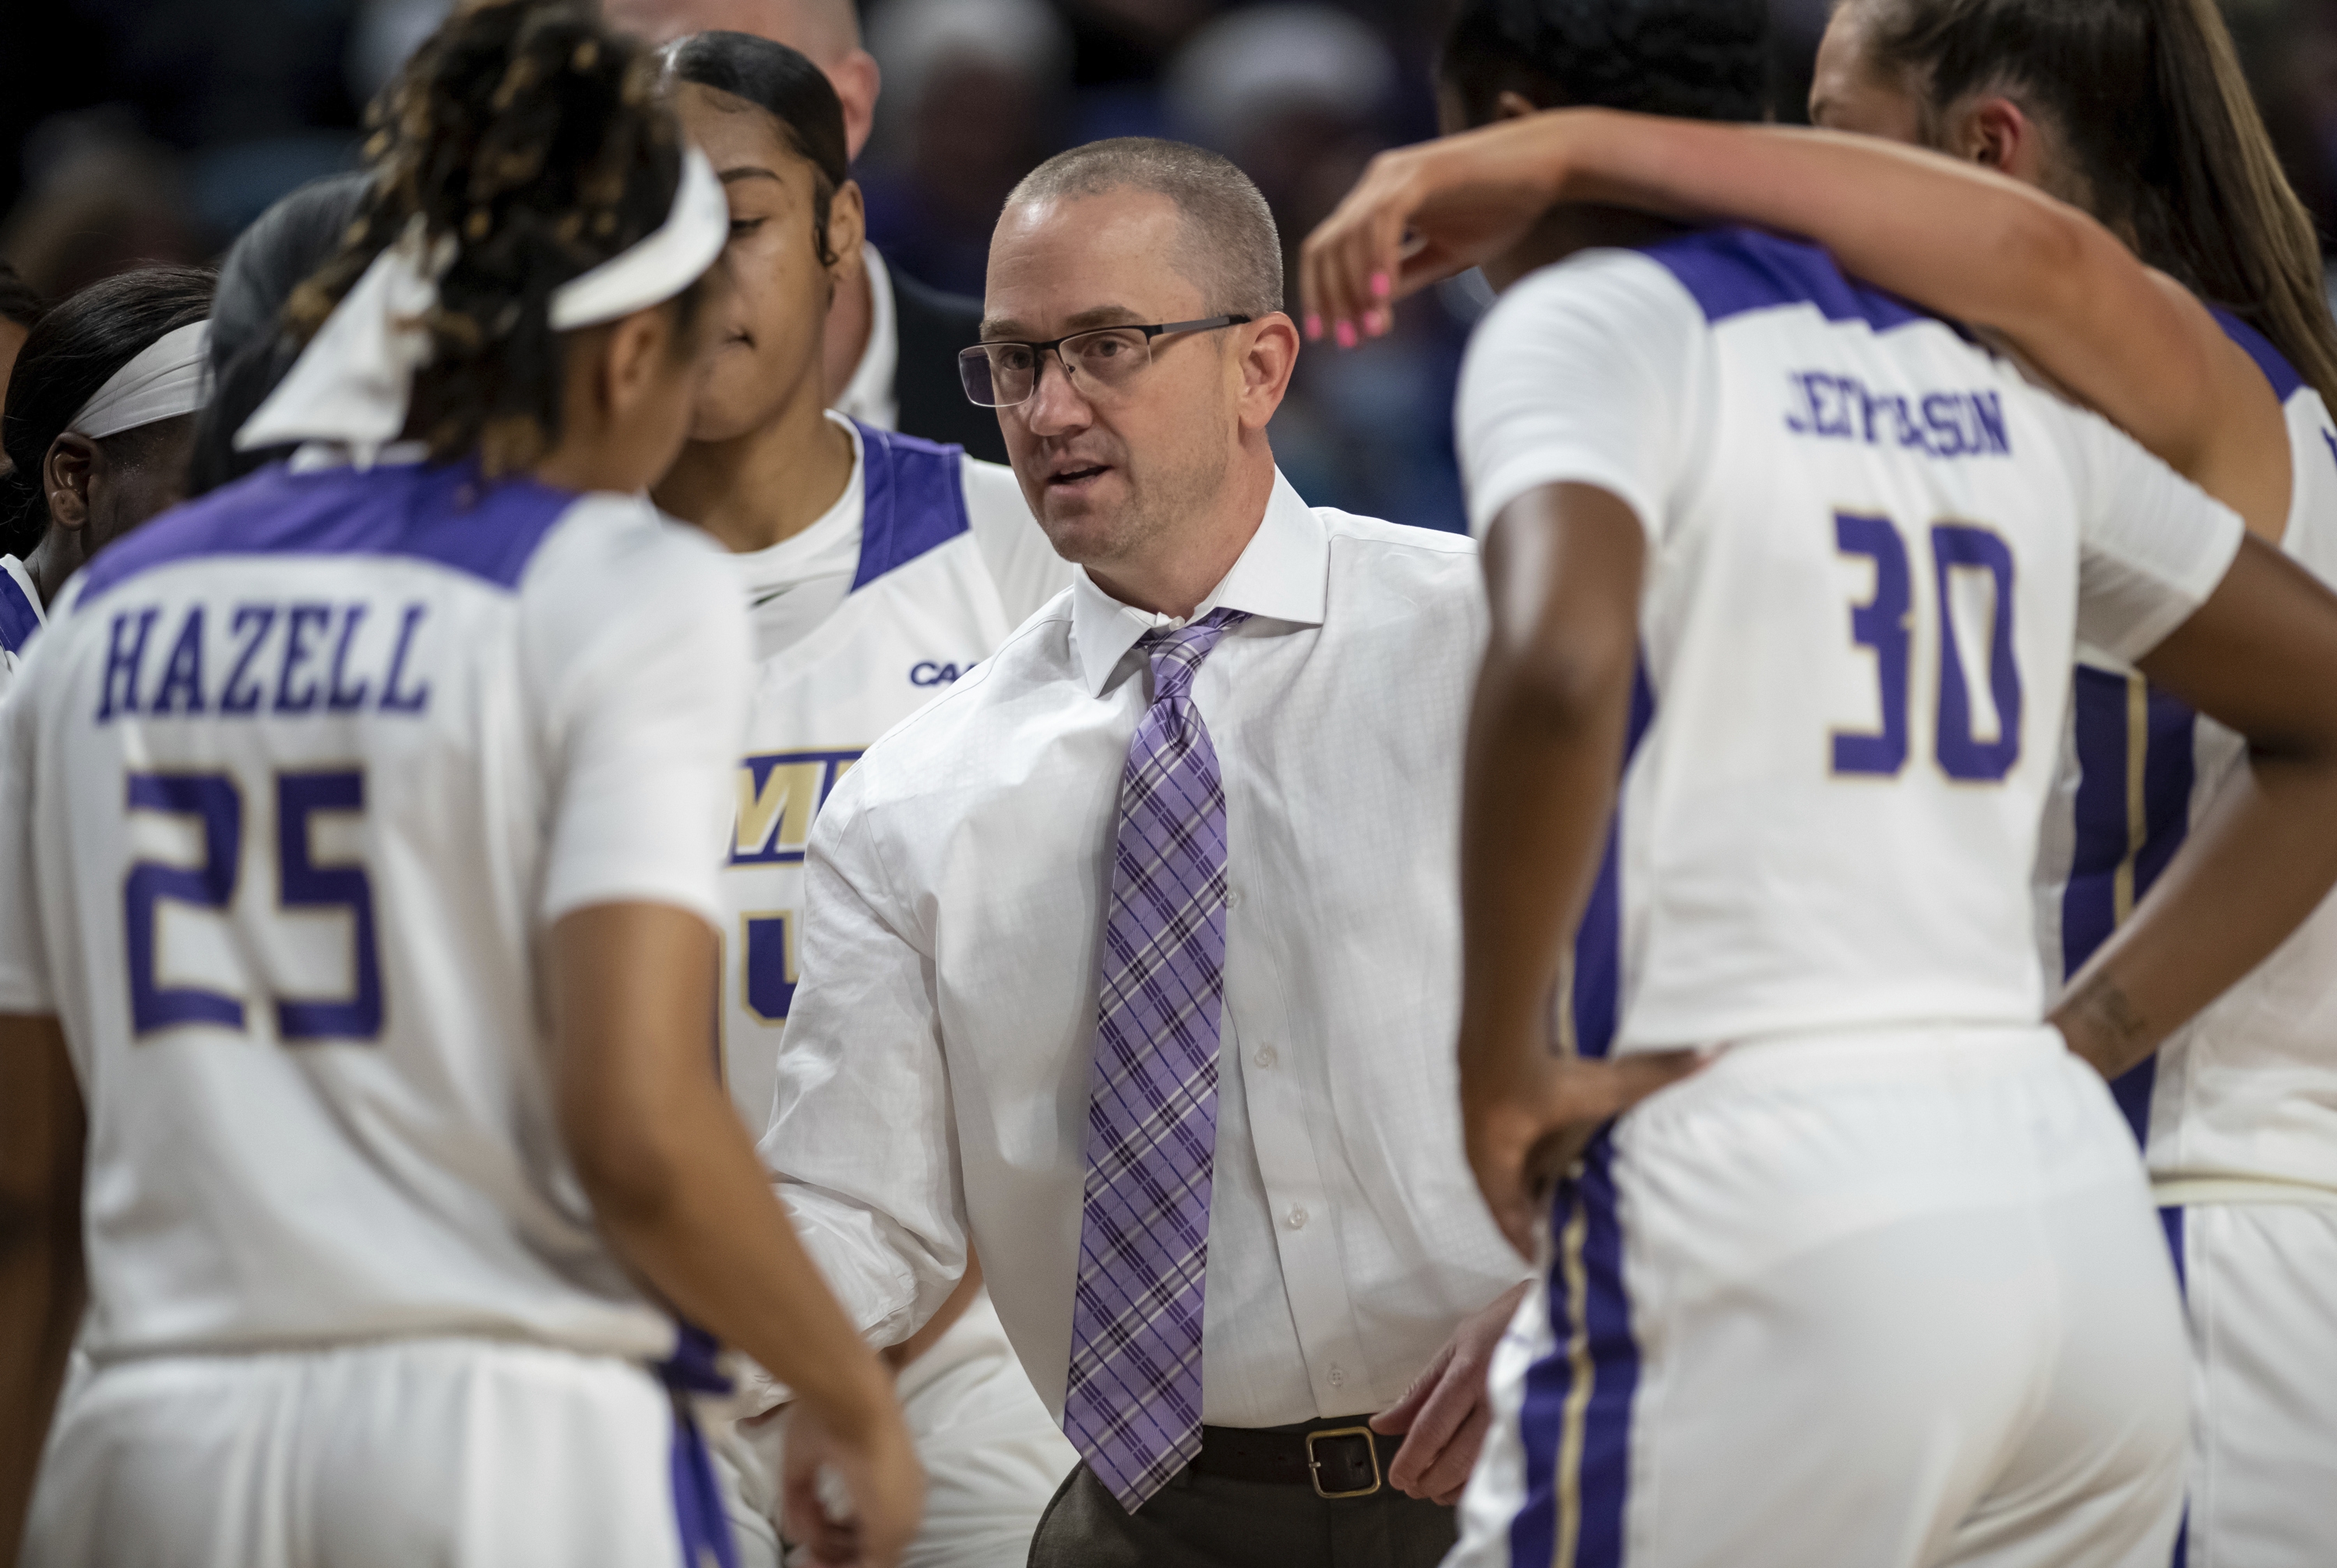 James Madison finding success in transition to Sun Belt